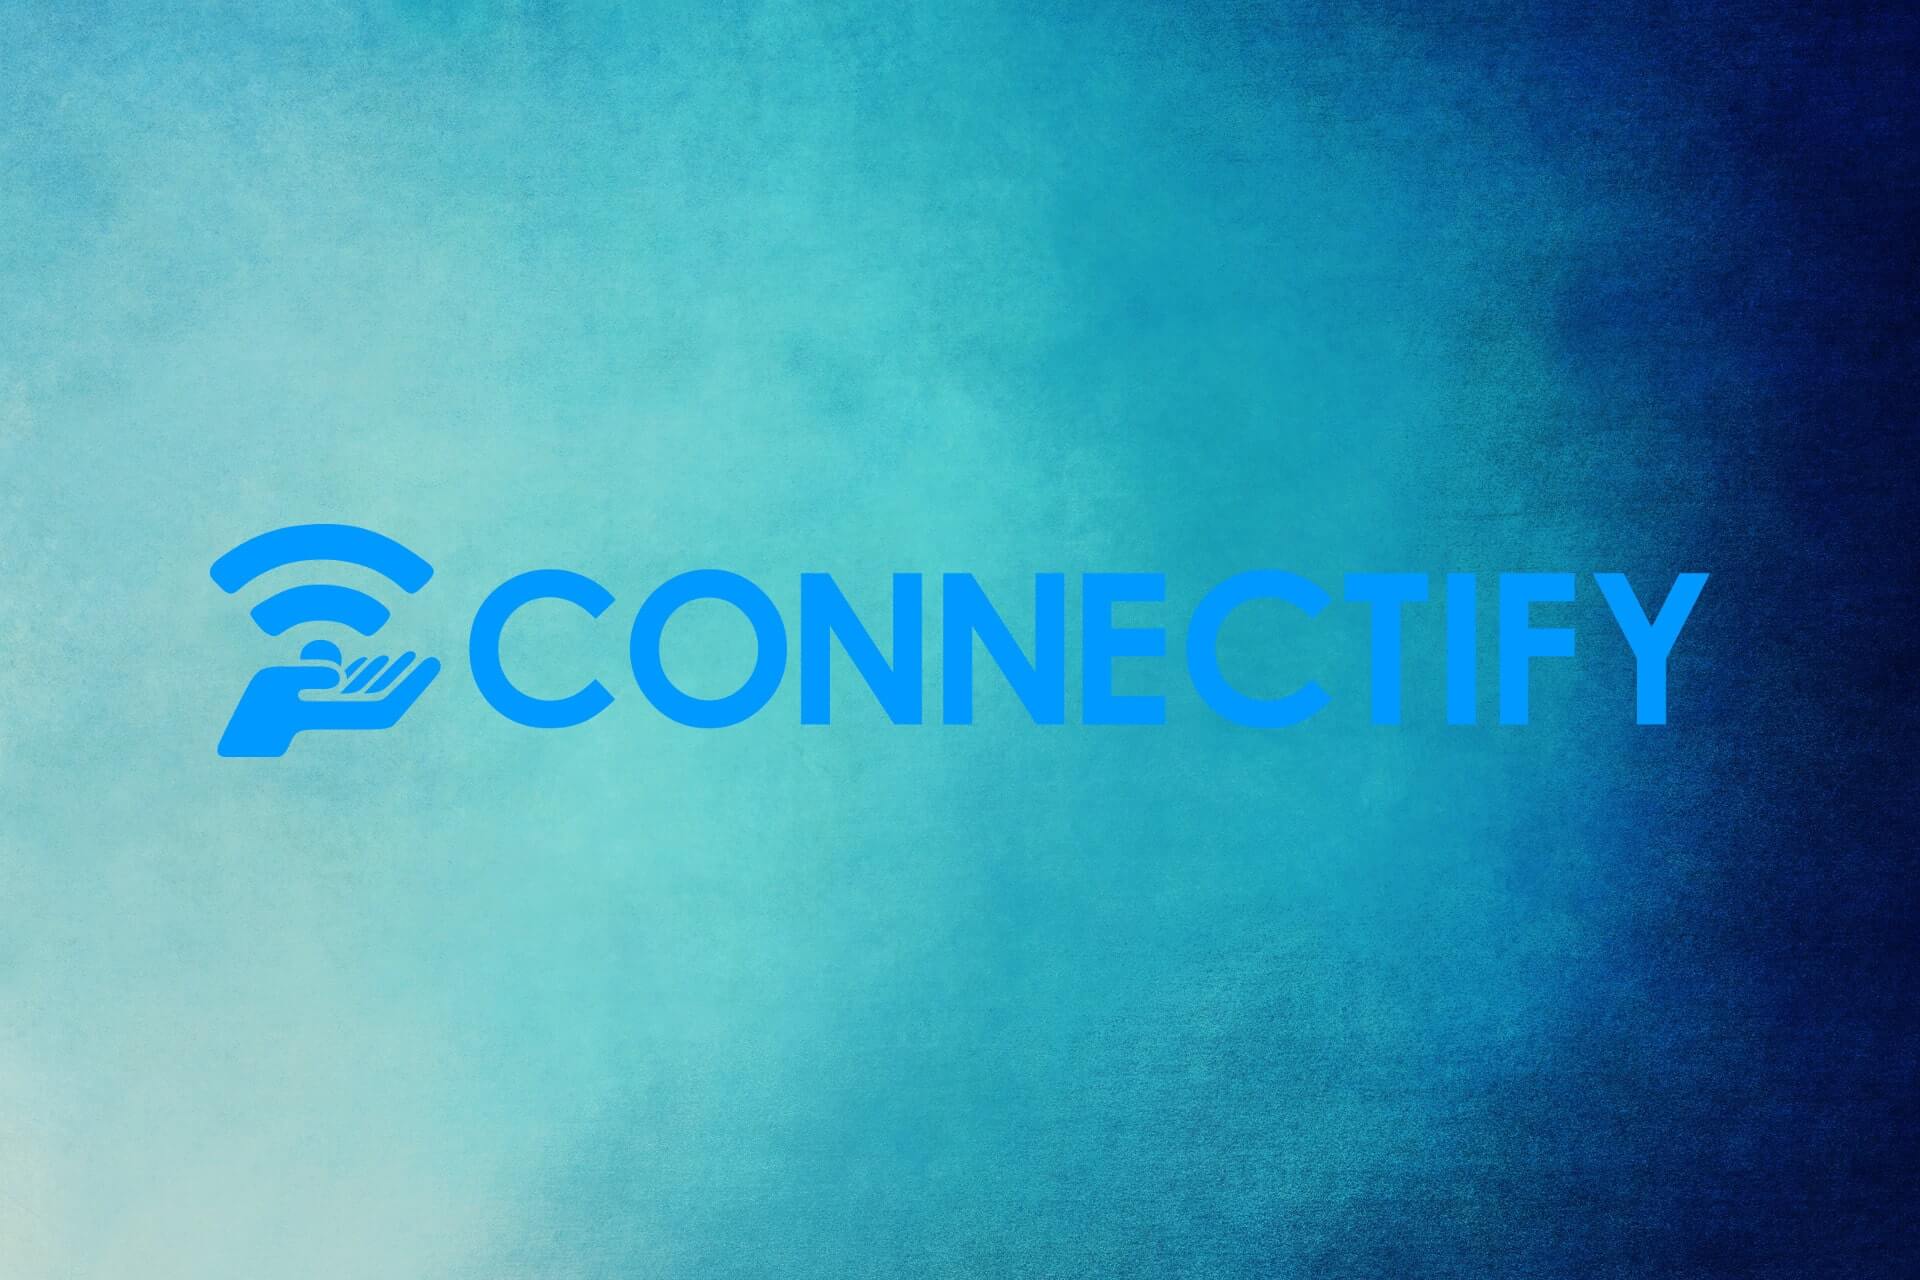 connectify hotspot 2016 free download